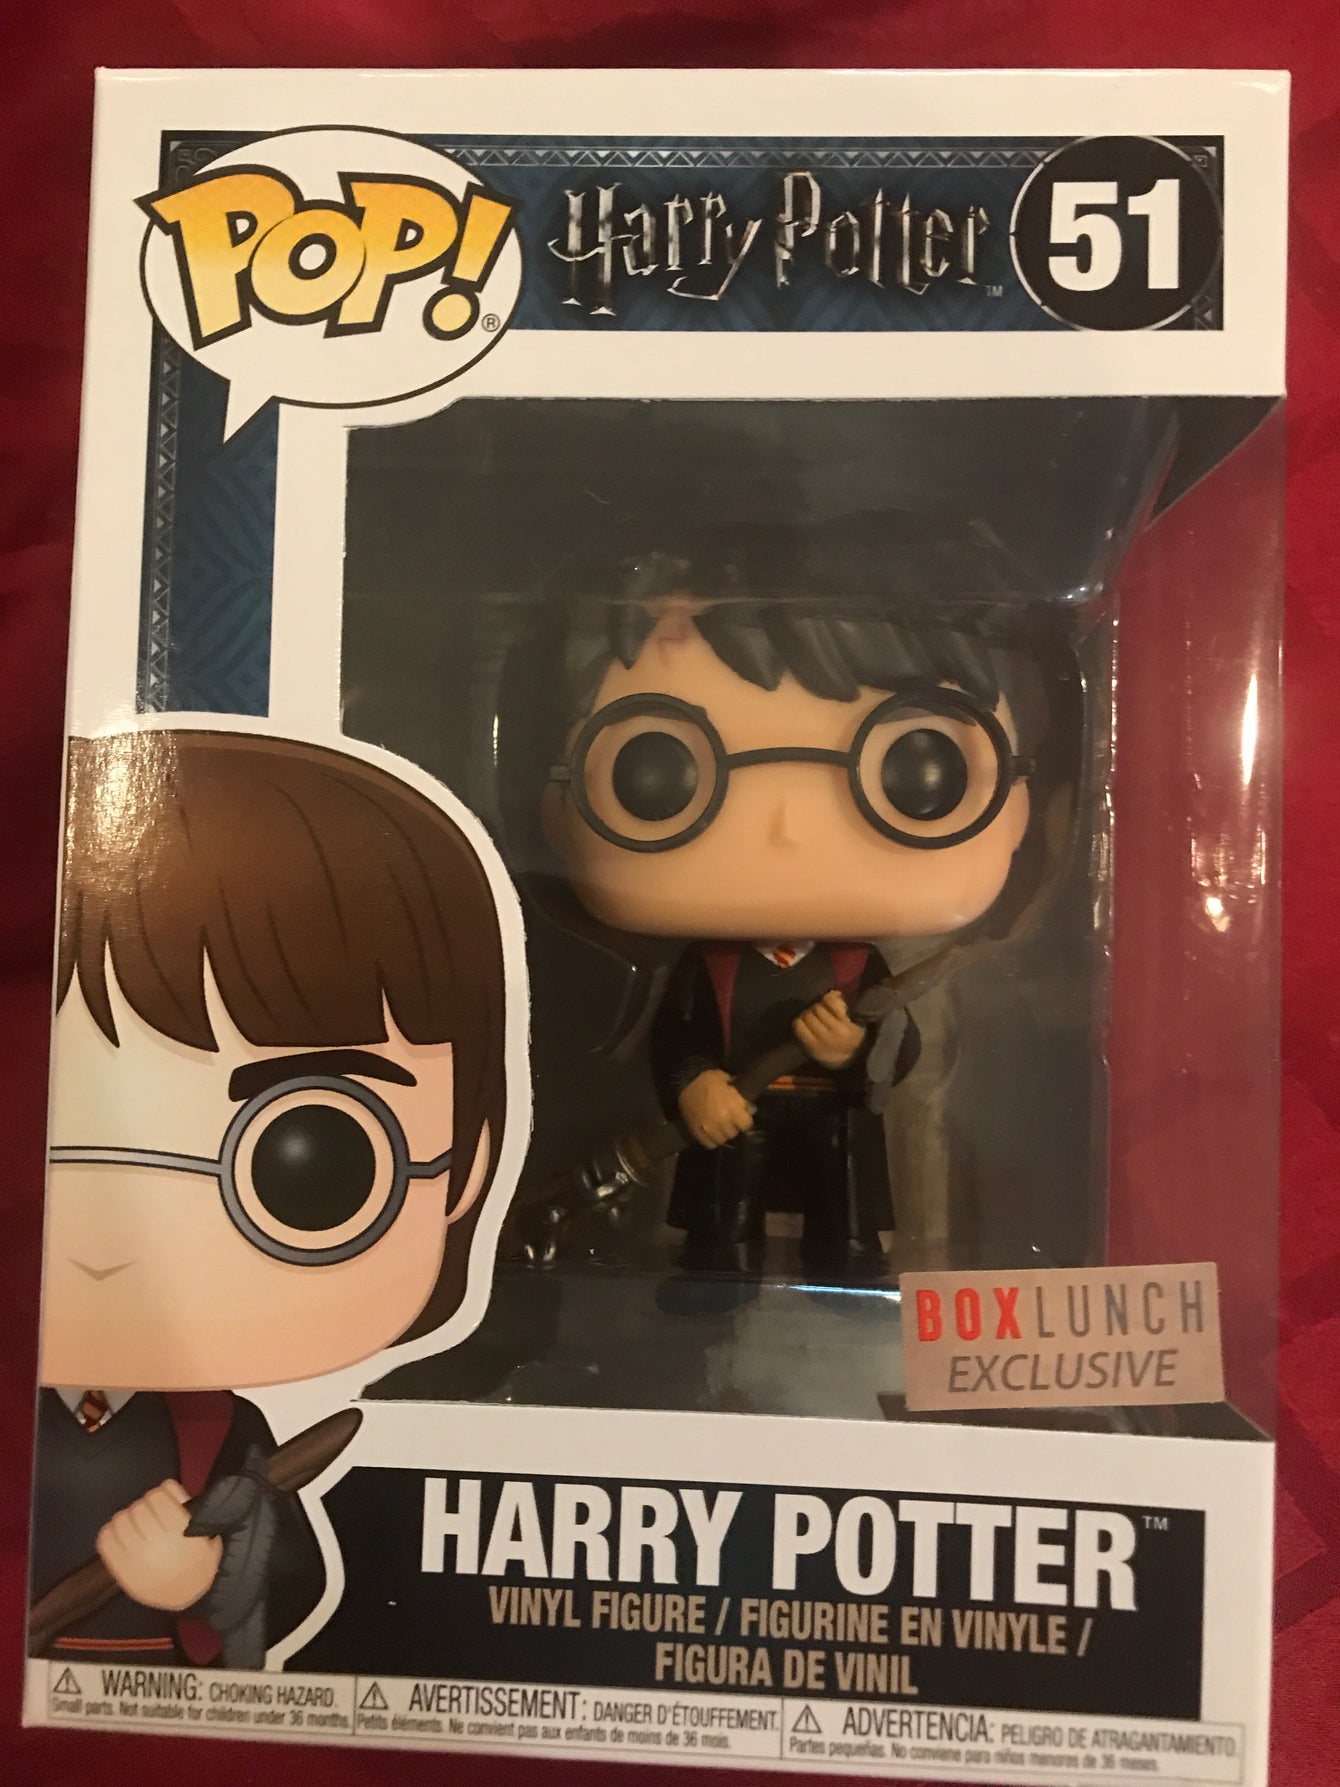 Box lunch exclusive harry potter LC2